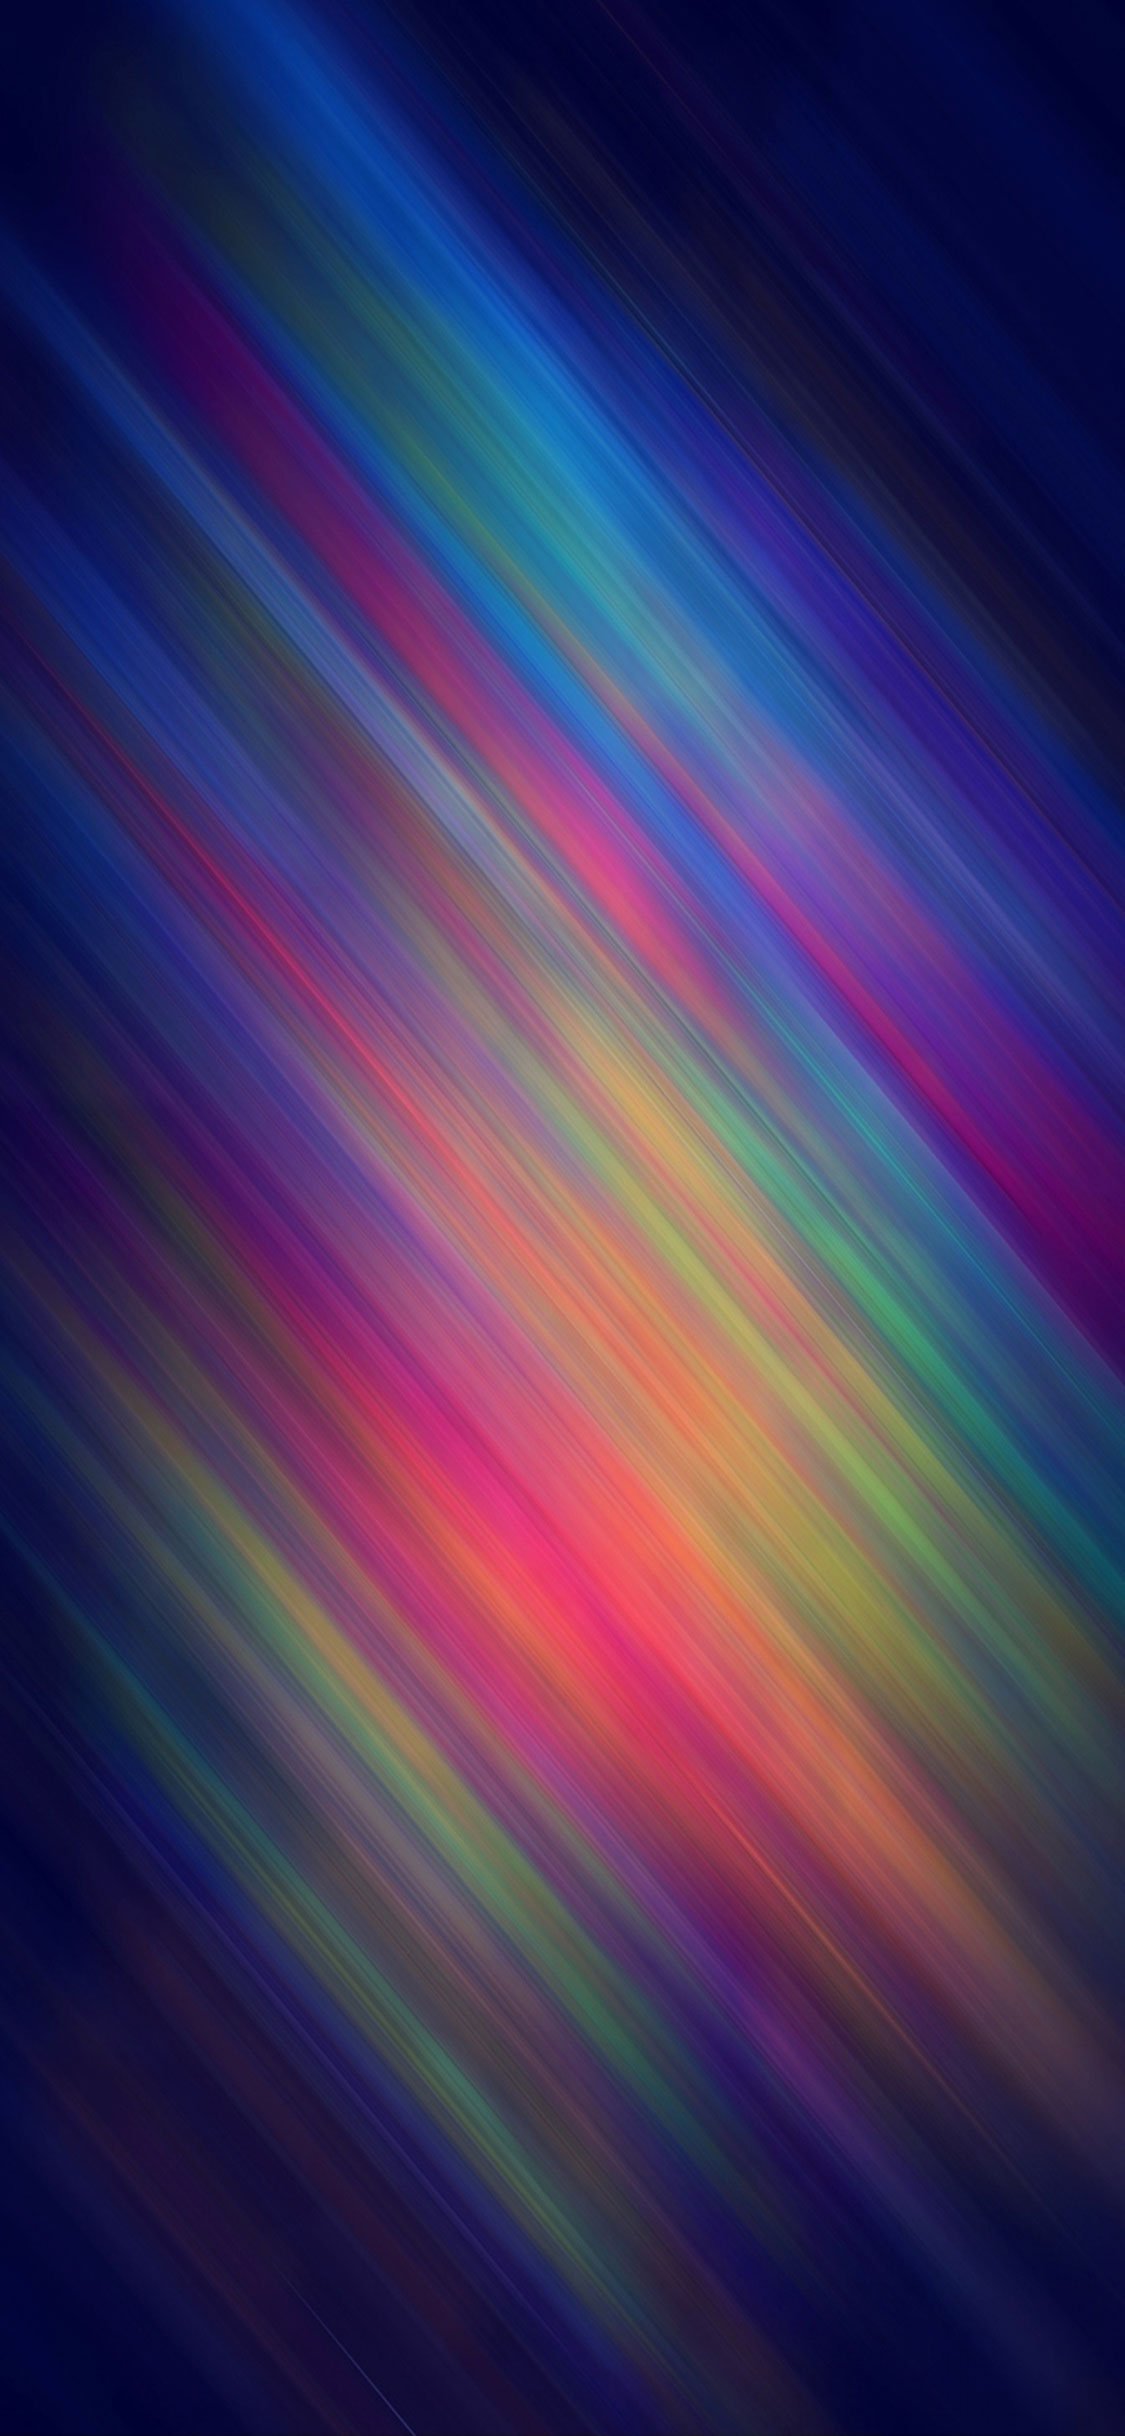 30+ New Cool iPhone X Wallpapers & Backgrounds to freshen ...